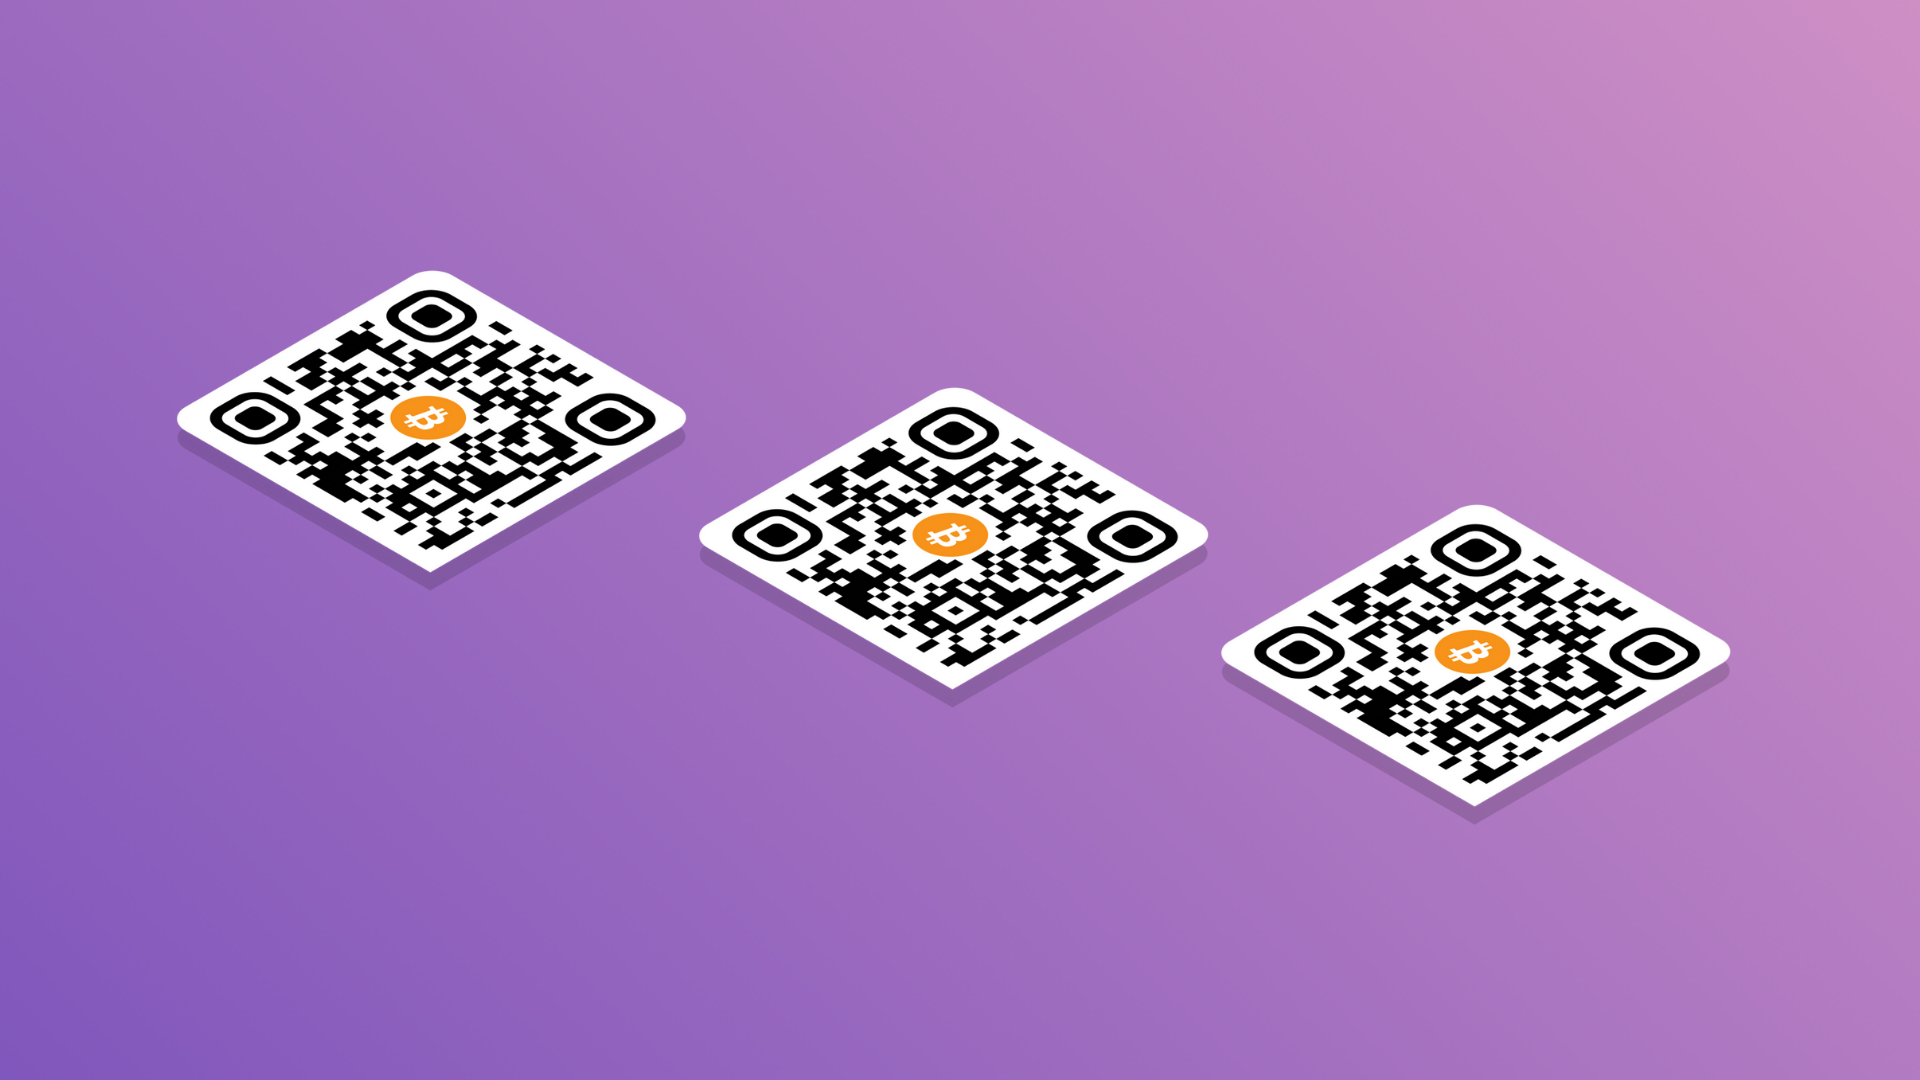 three aligned qr codes with ethereum addresses on them